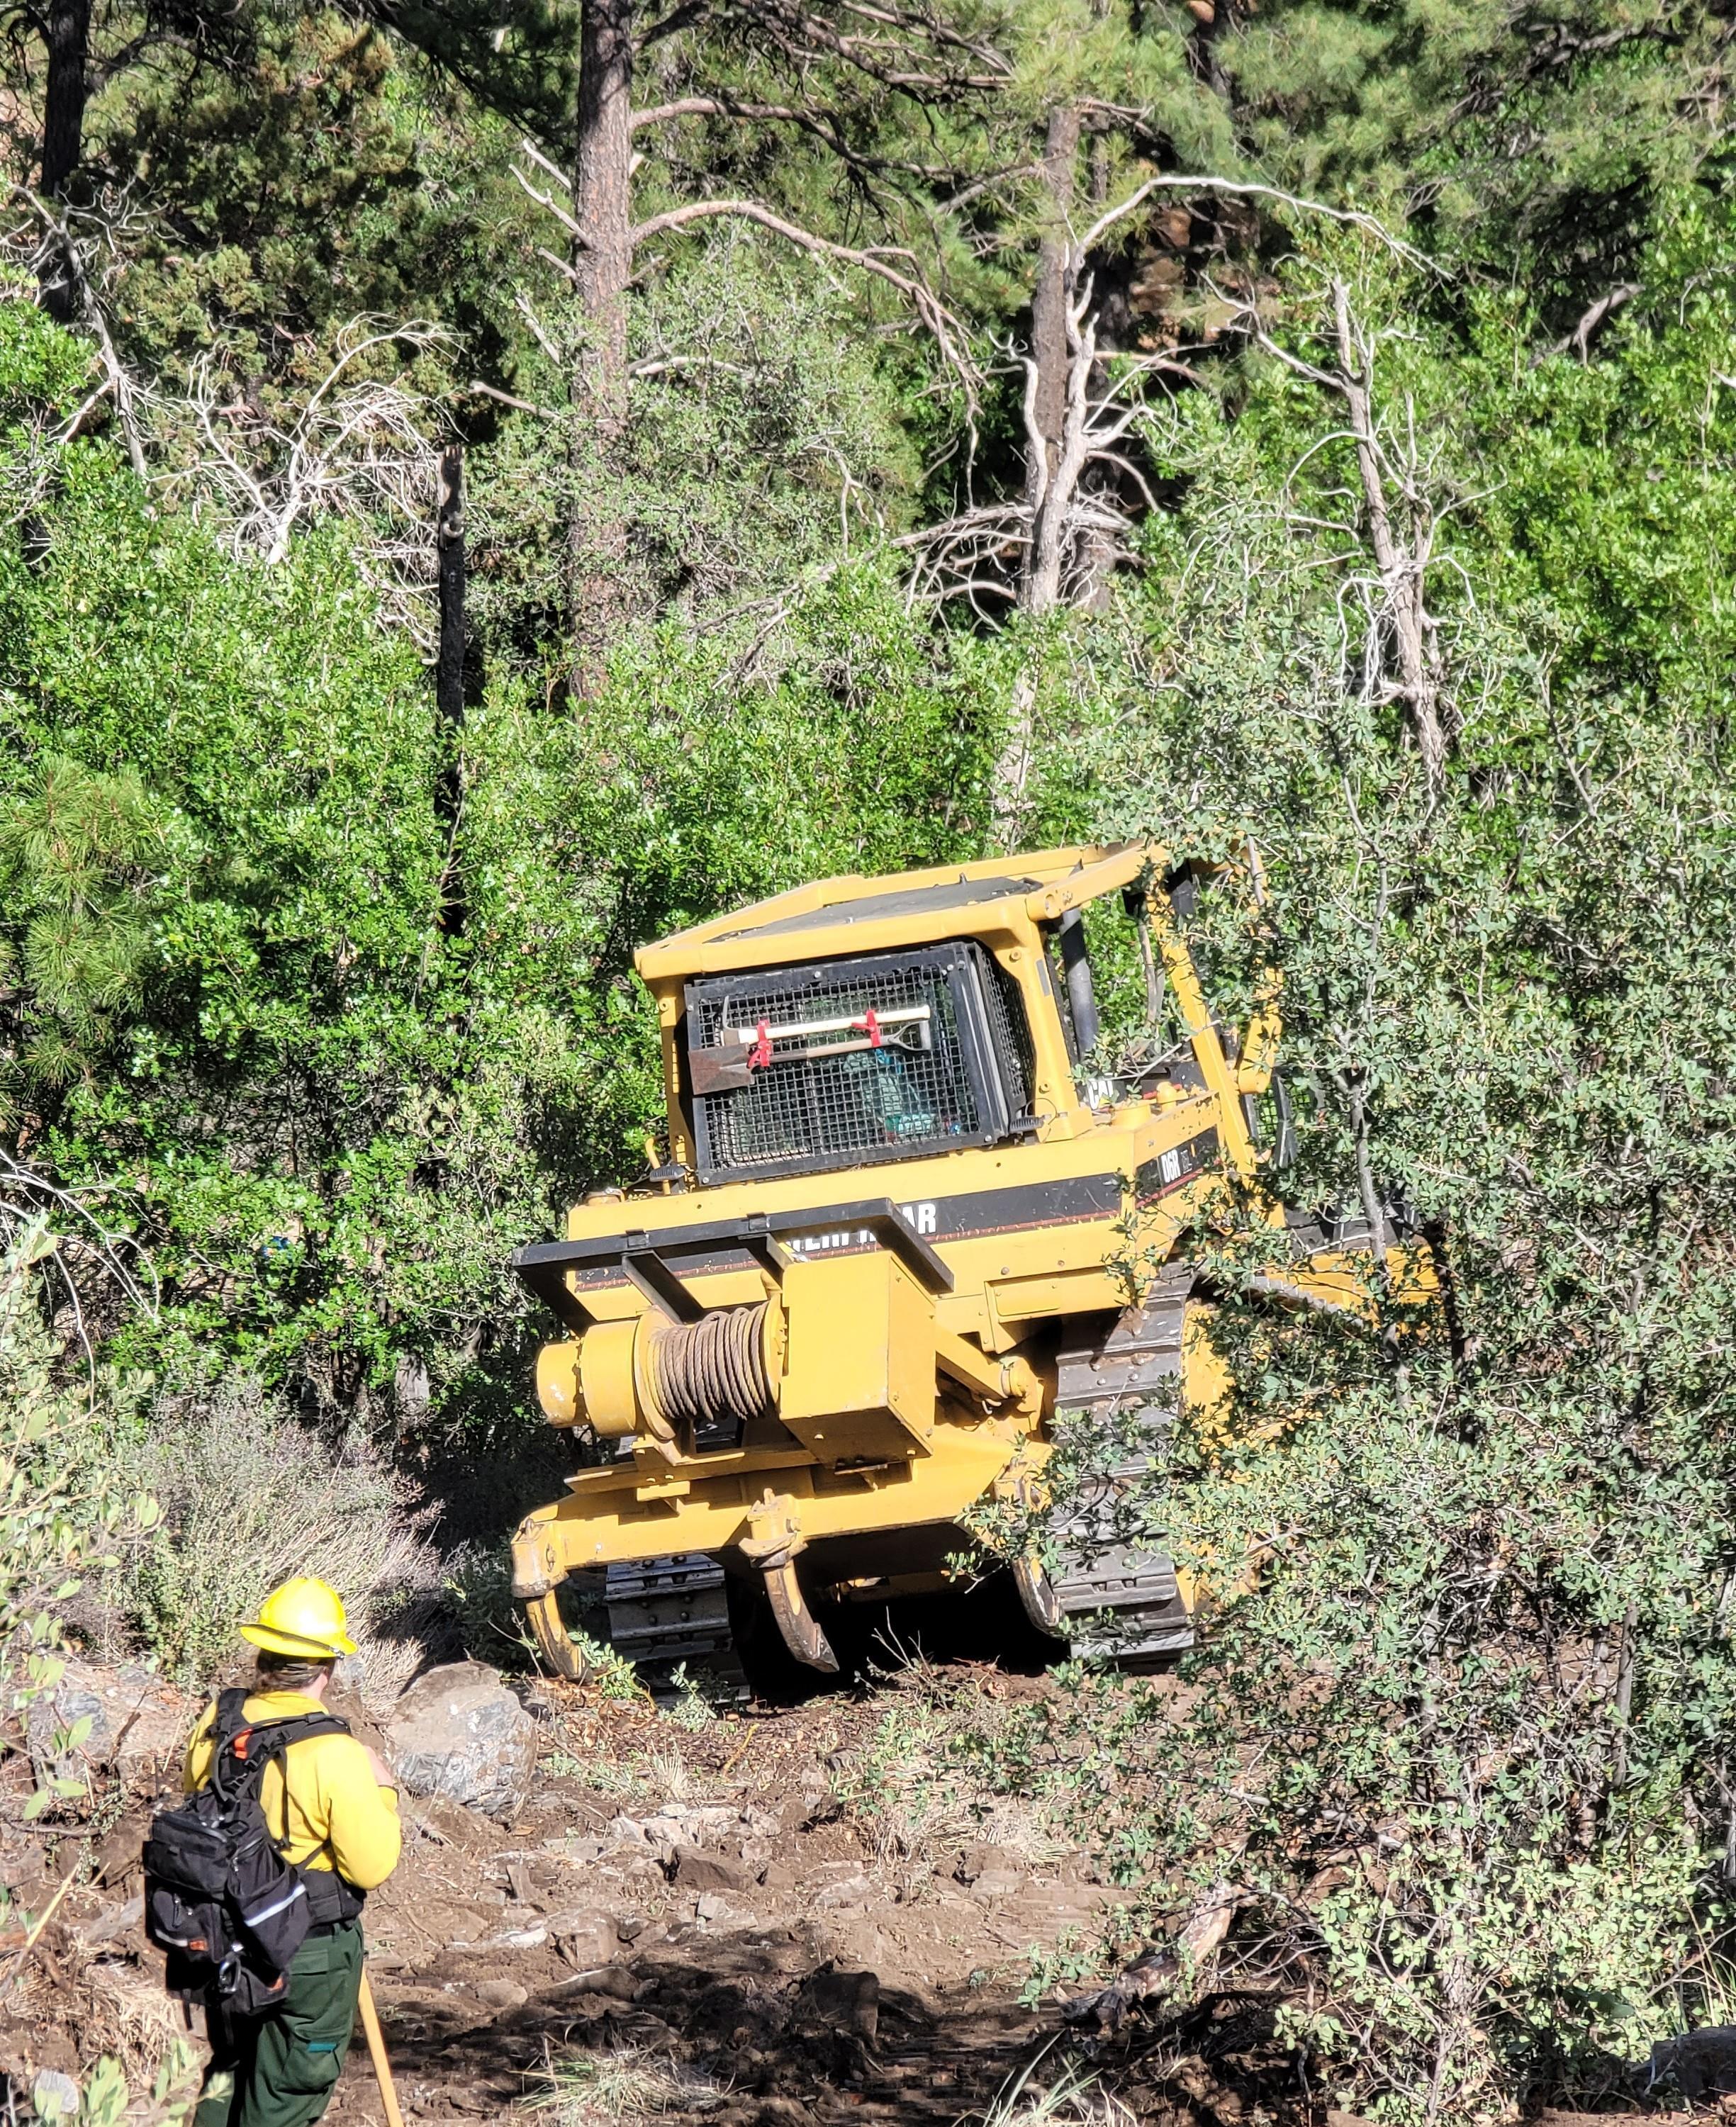 Constructing dozer line a bull dozer cuts through brush firefighter stands nearby to spot driver. 7-9-21